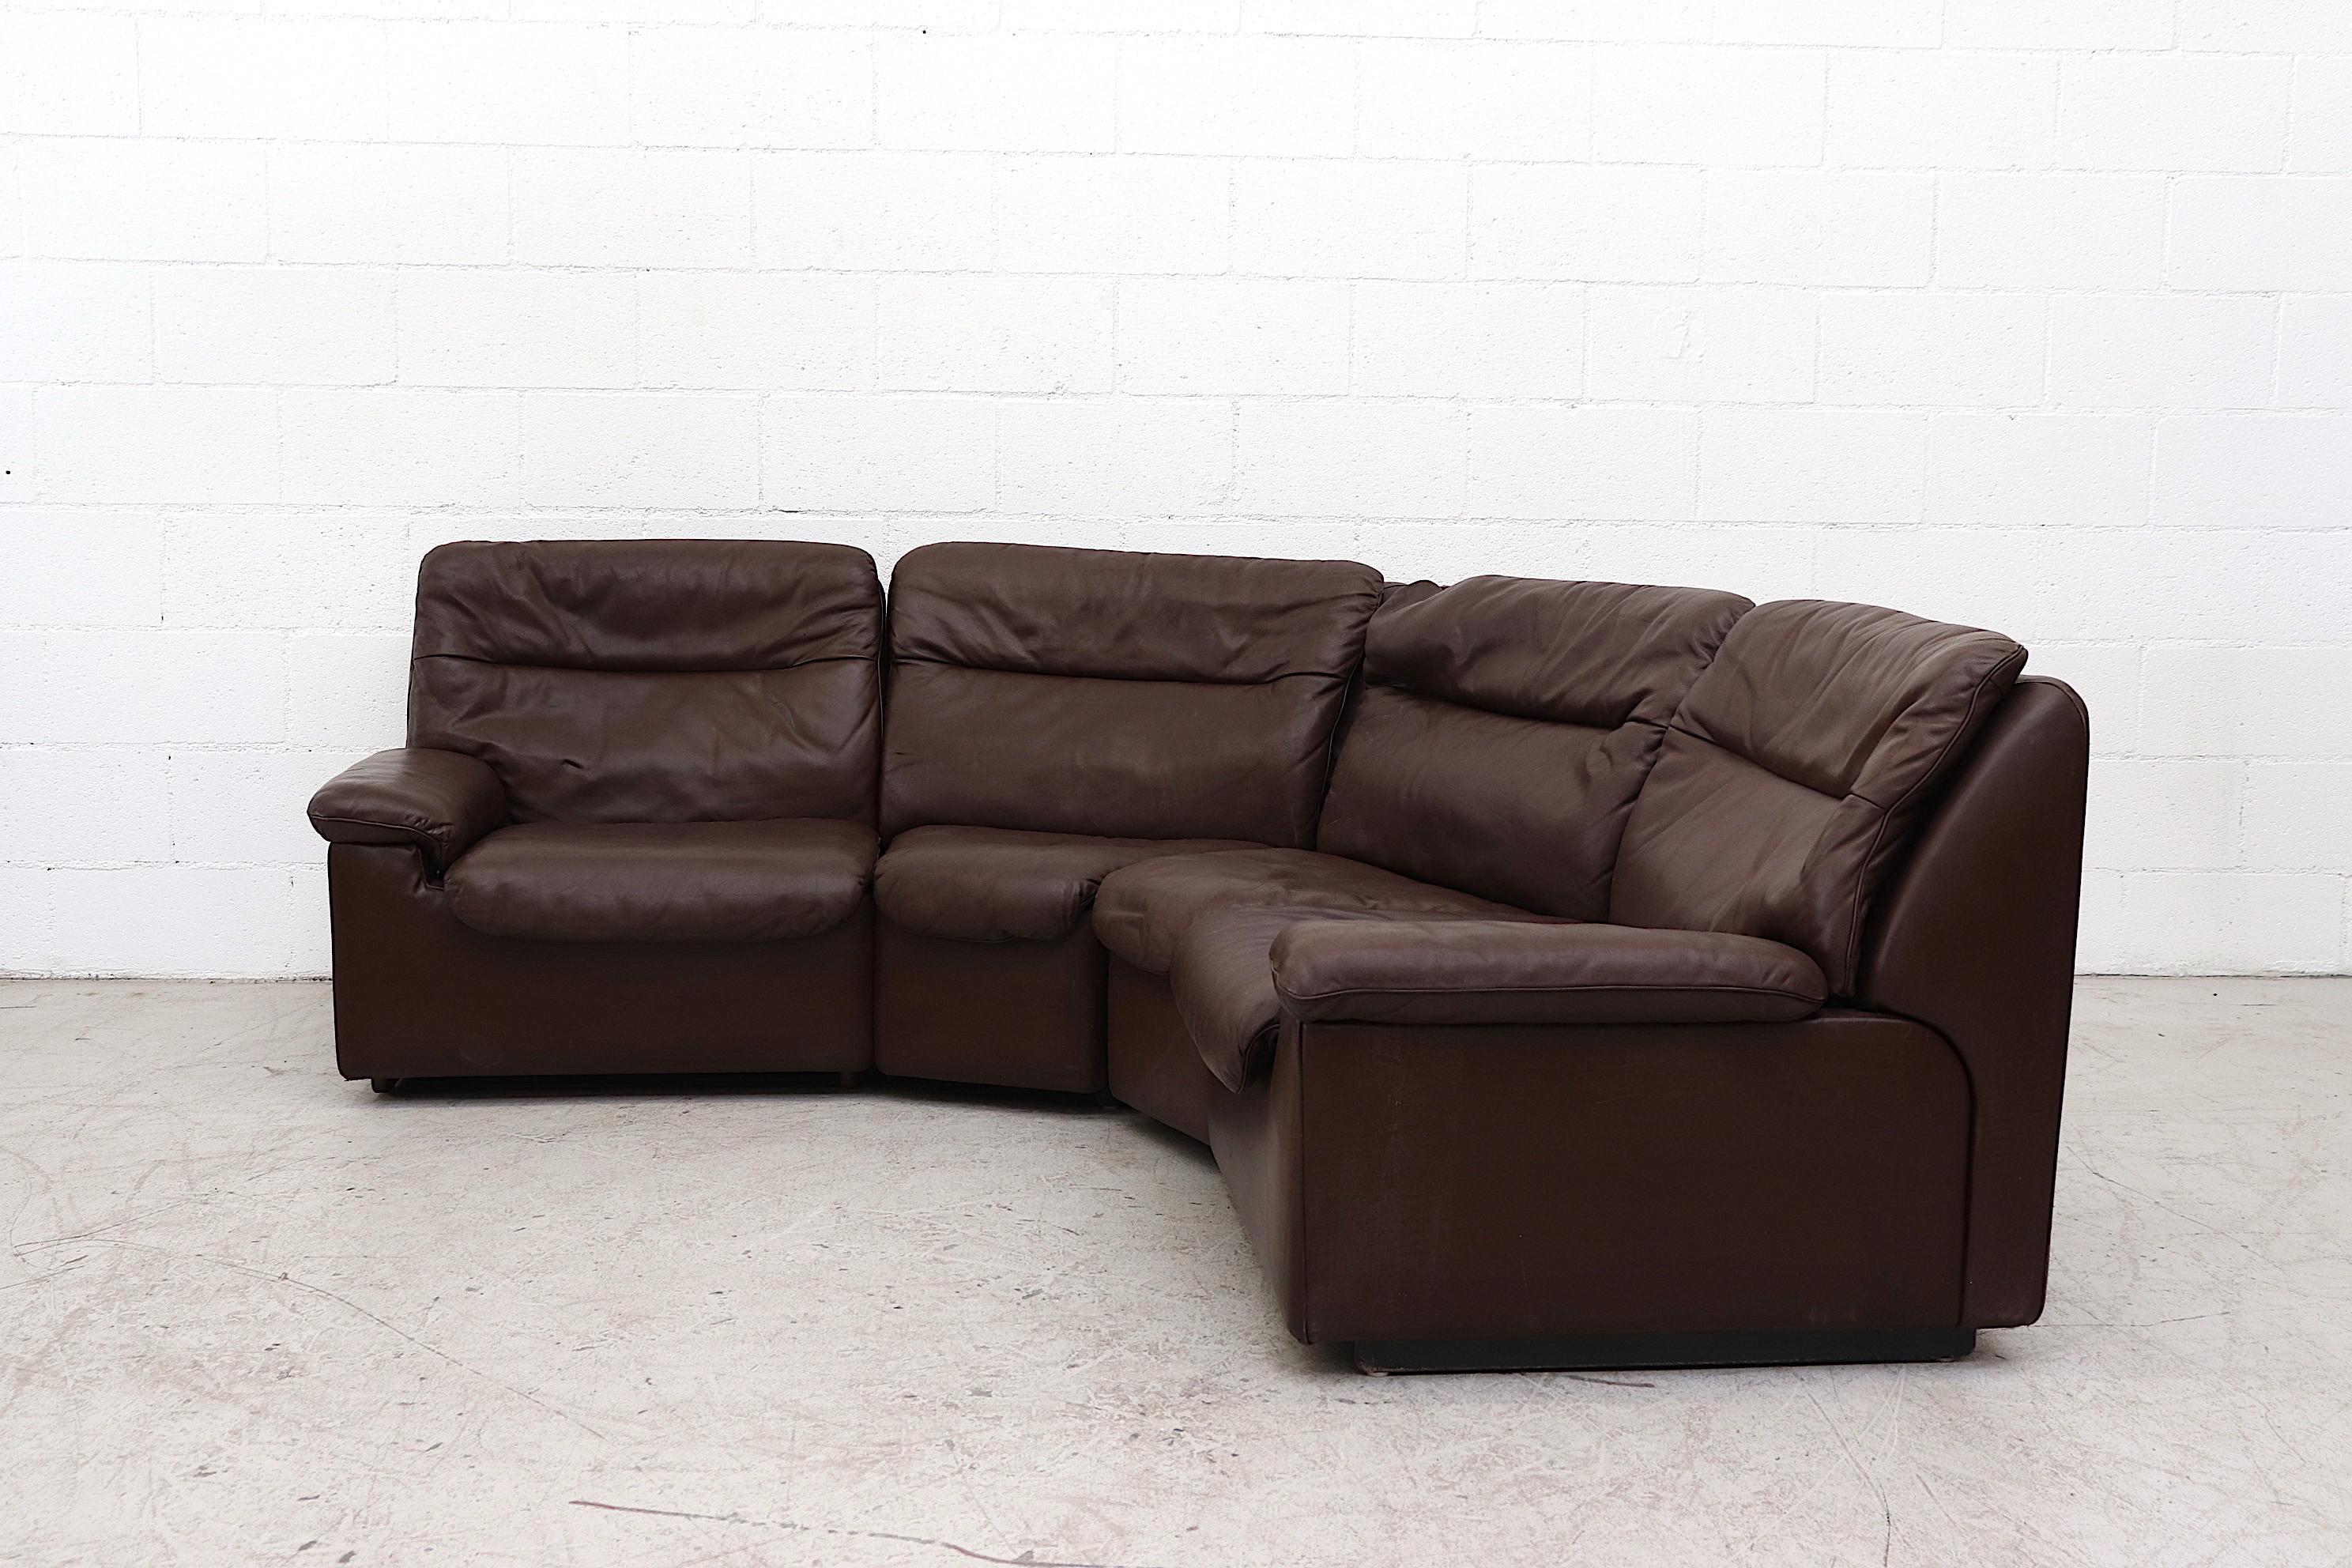 Handsome De Sede chocolate brown leather curved sectional. In good overall condition with visible patina and minor scratching to leather. Consists of 4 sections, stylish and comfortable with original manufacture print. A similar terracotta sectional